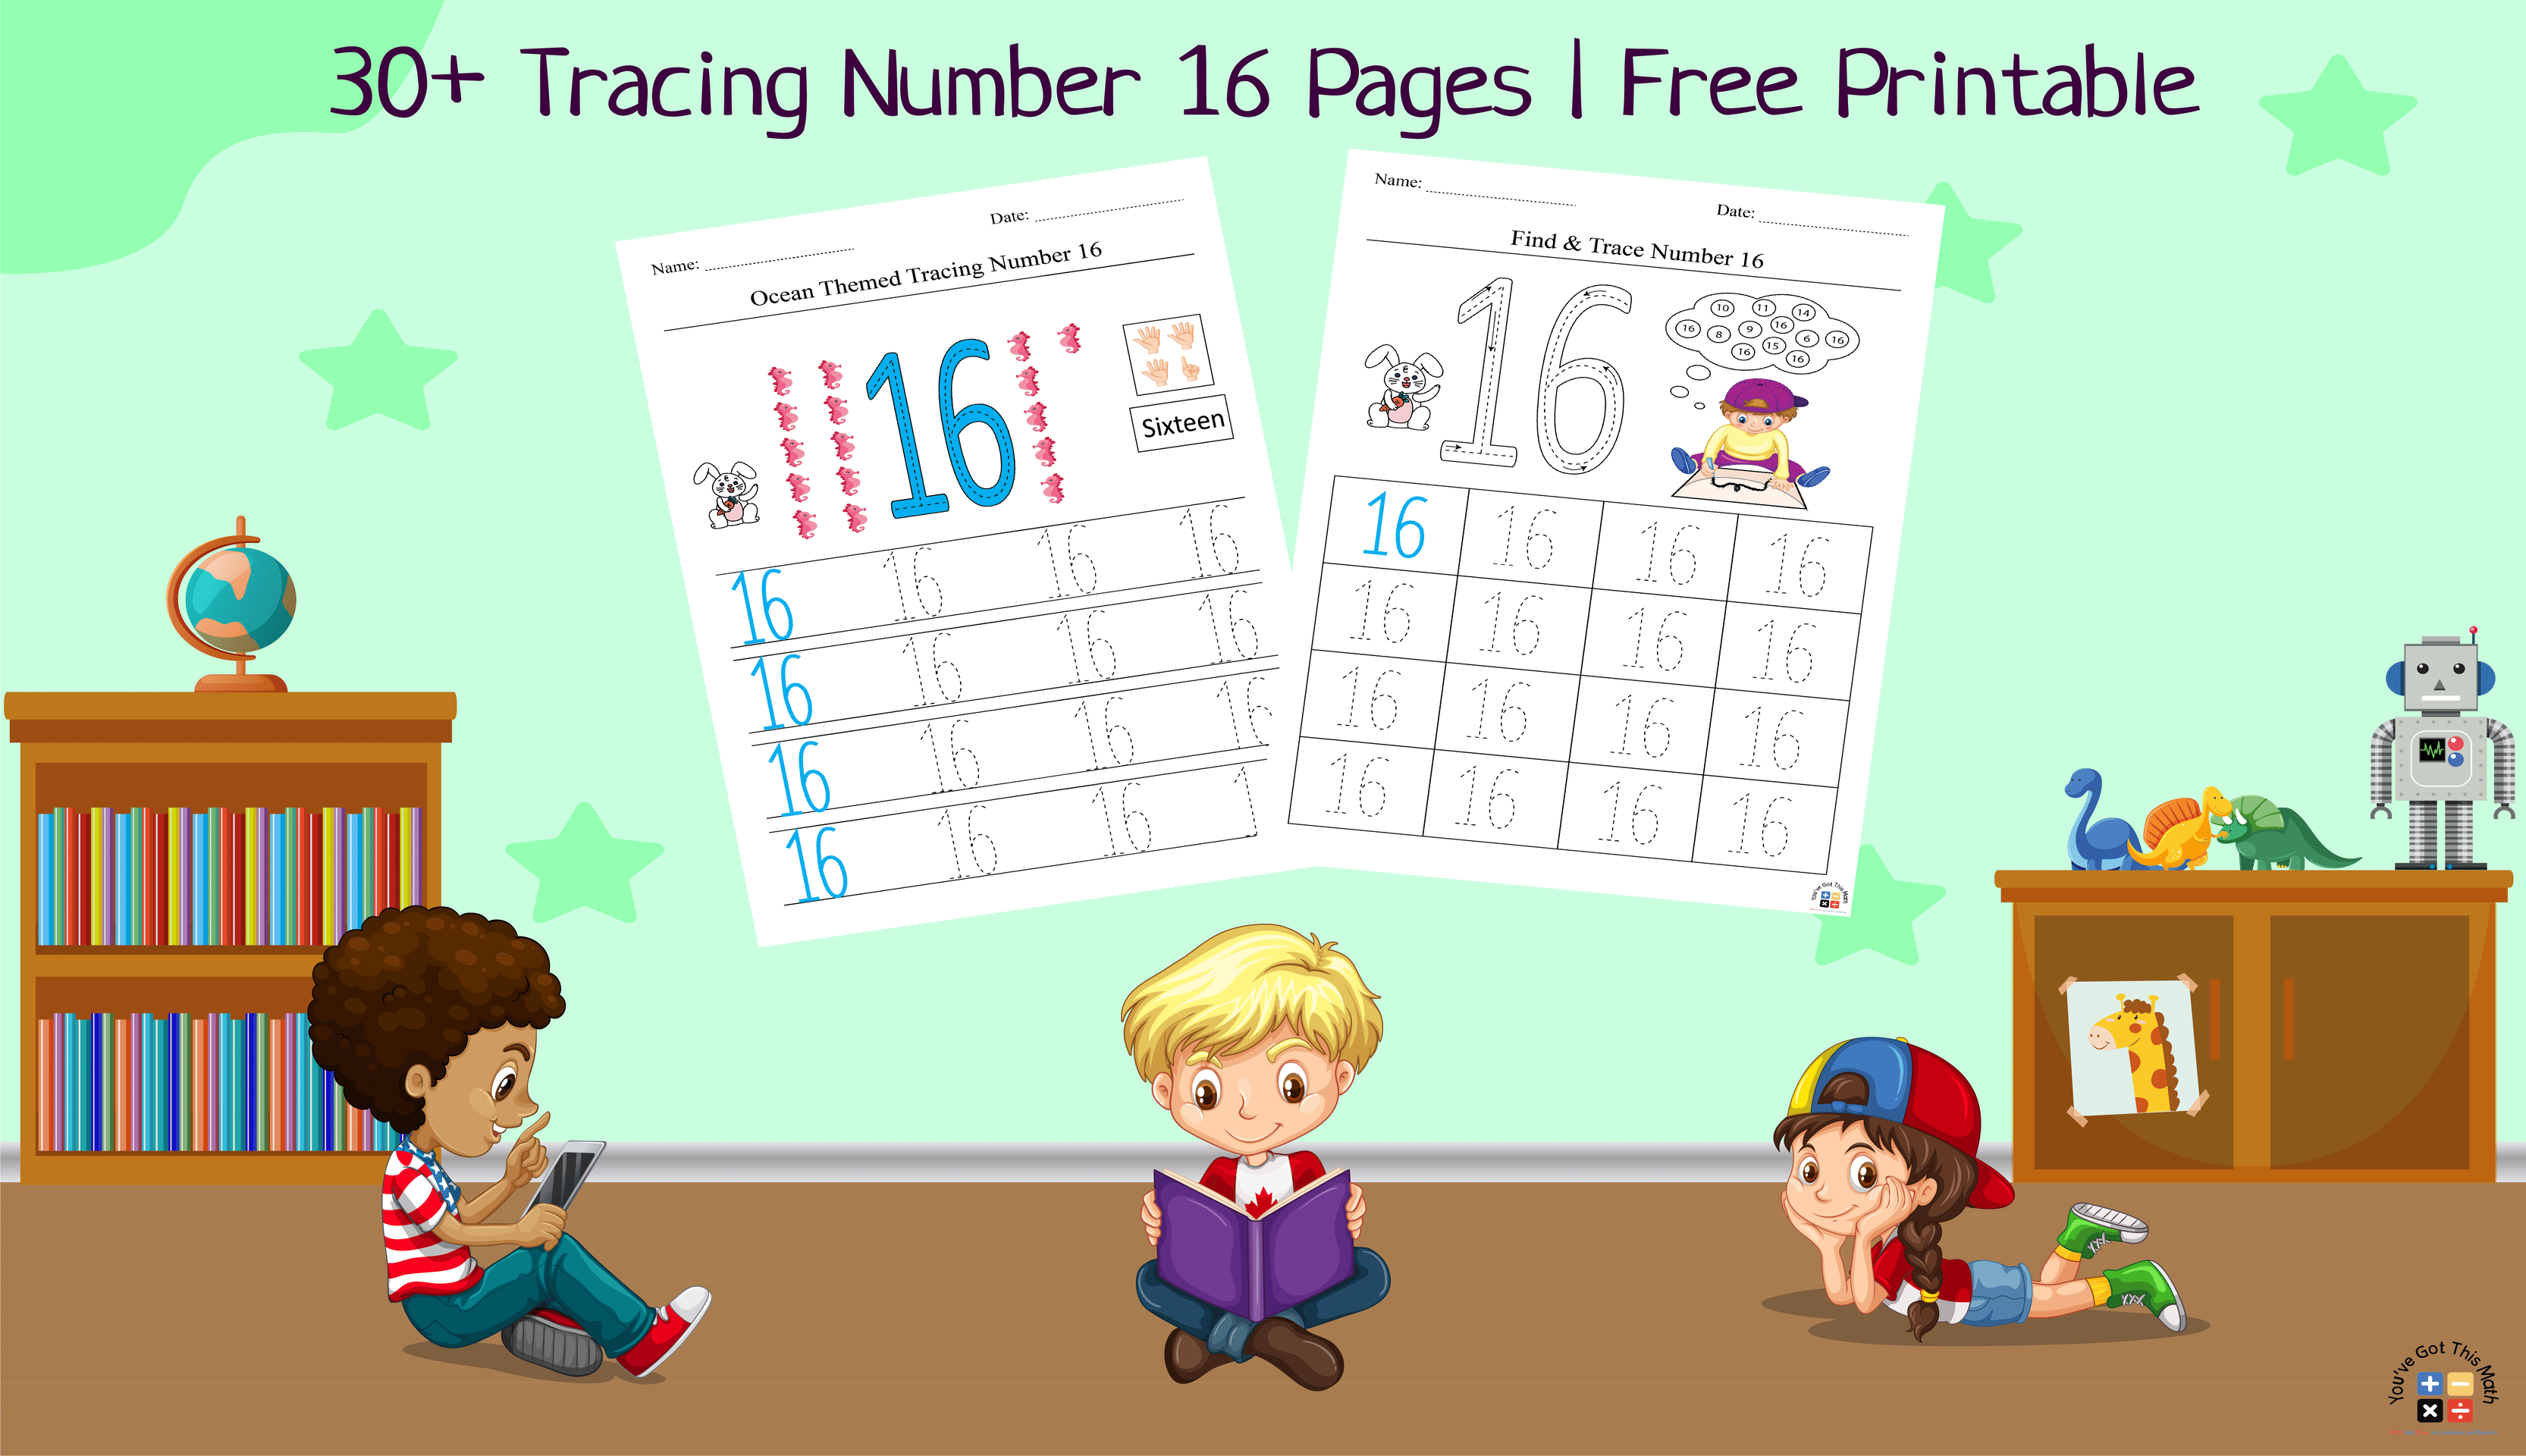 30+ Tracing Number 16 Pages | Free Printable